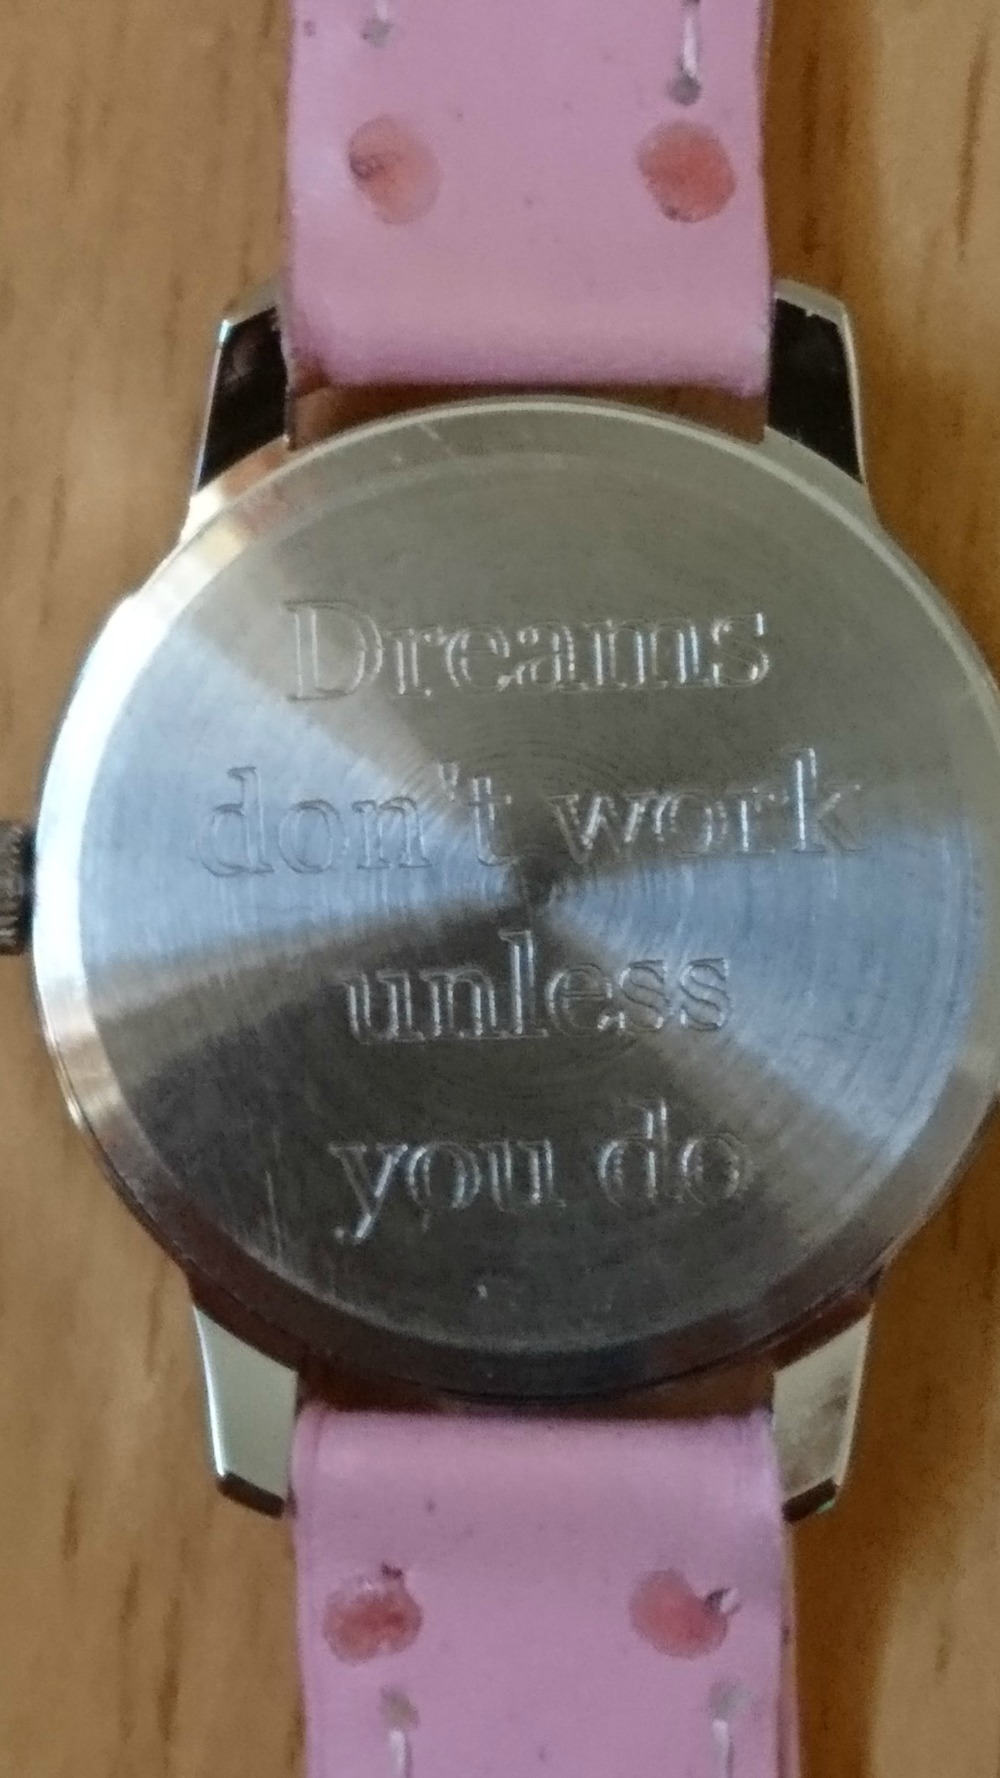 The engraved message on the back of the watch